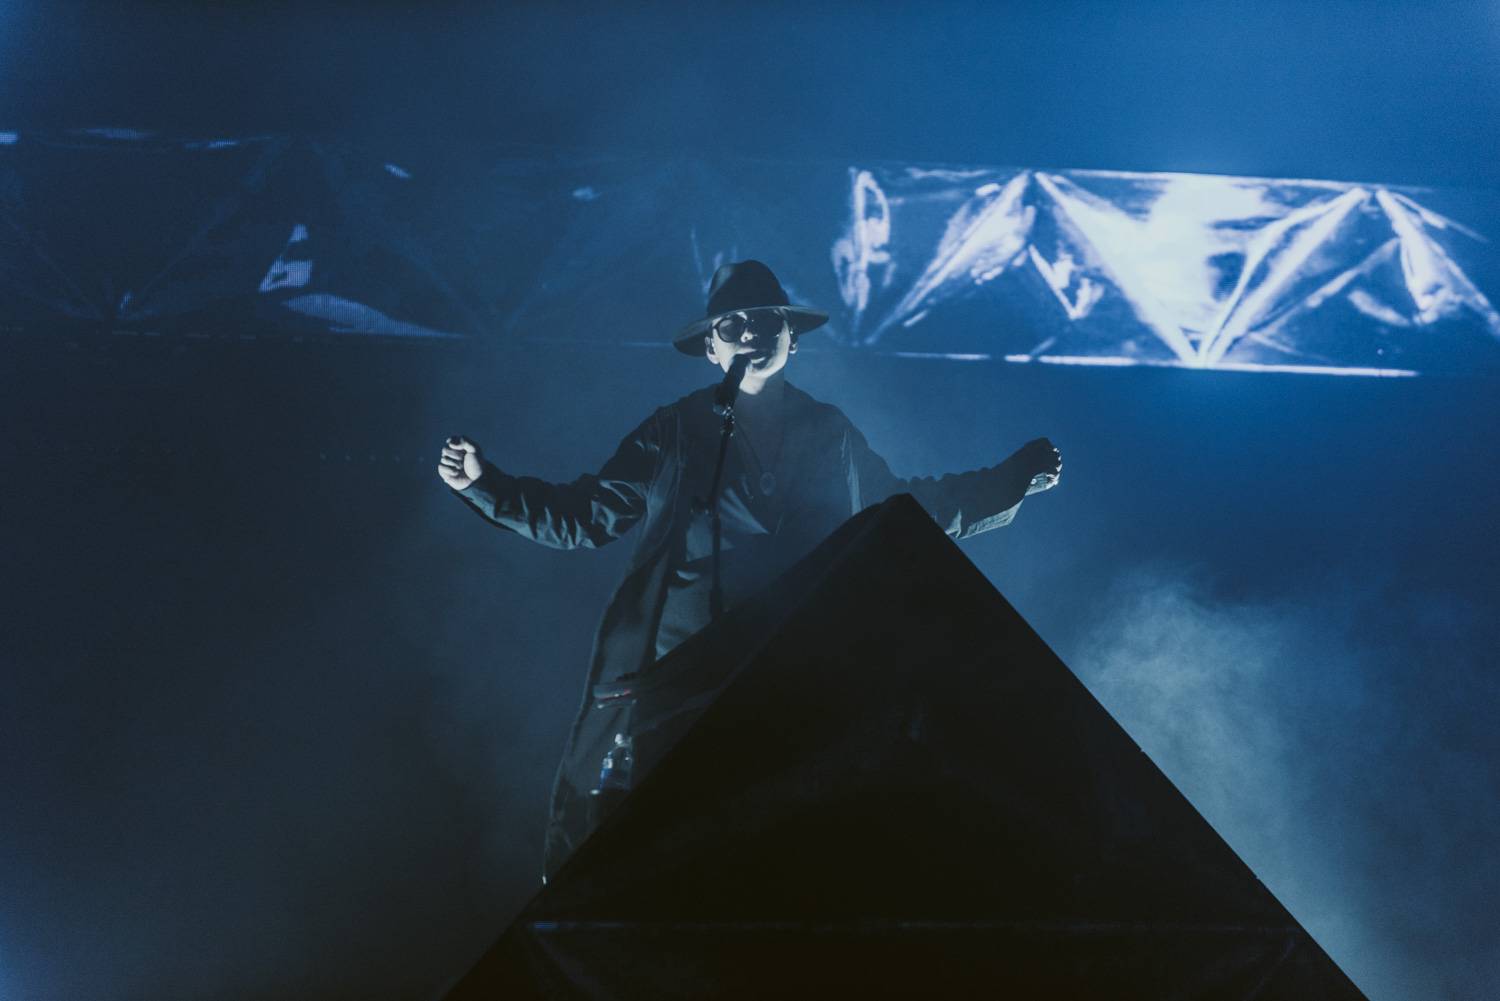 ZHU at the Vogue Theatre, Vancouver, Oct 15 2018. Pavel Boiko photo.